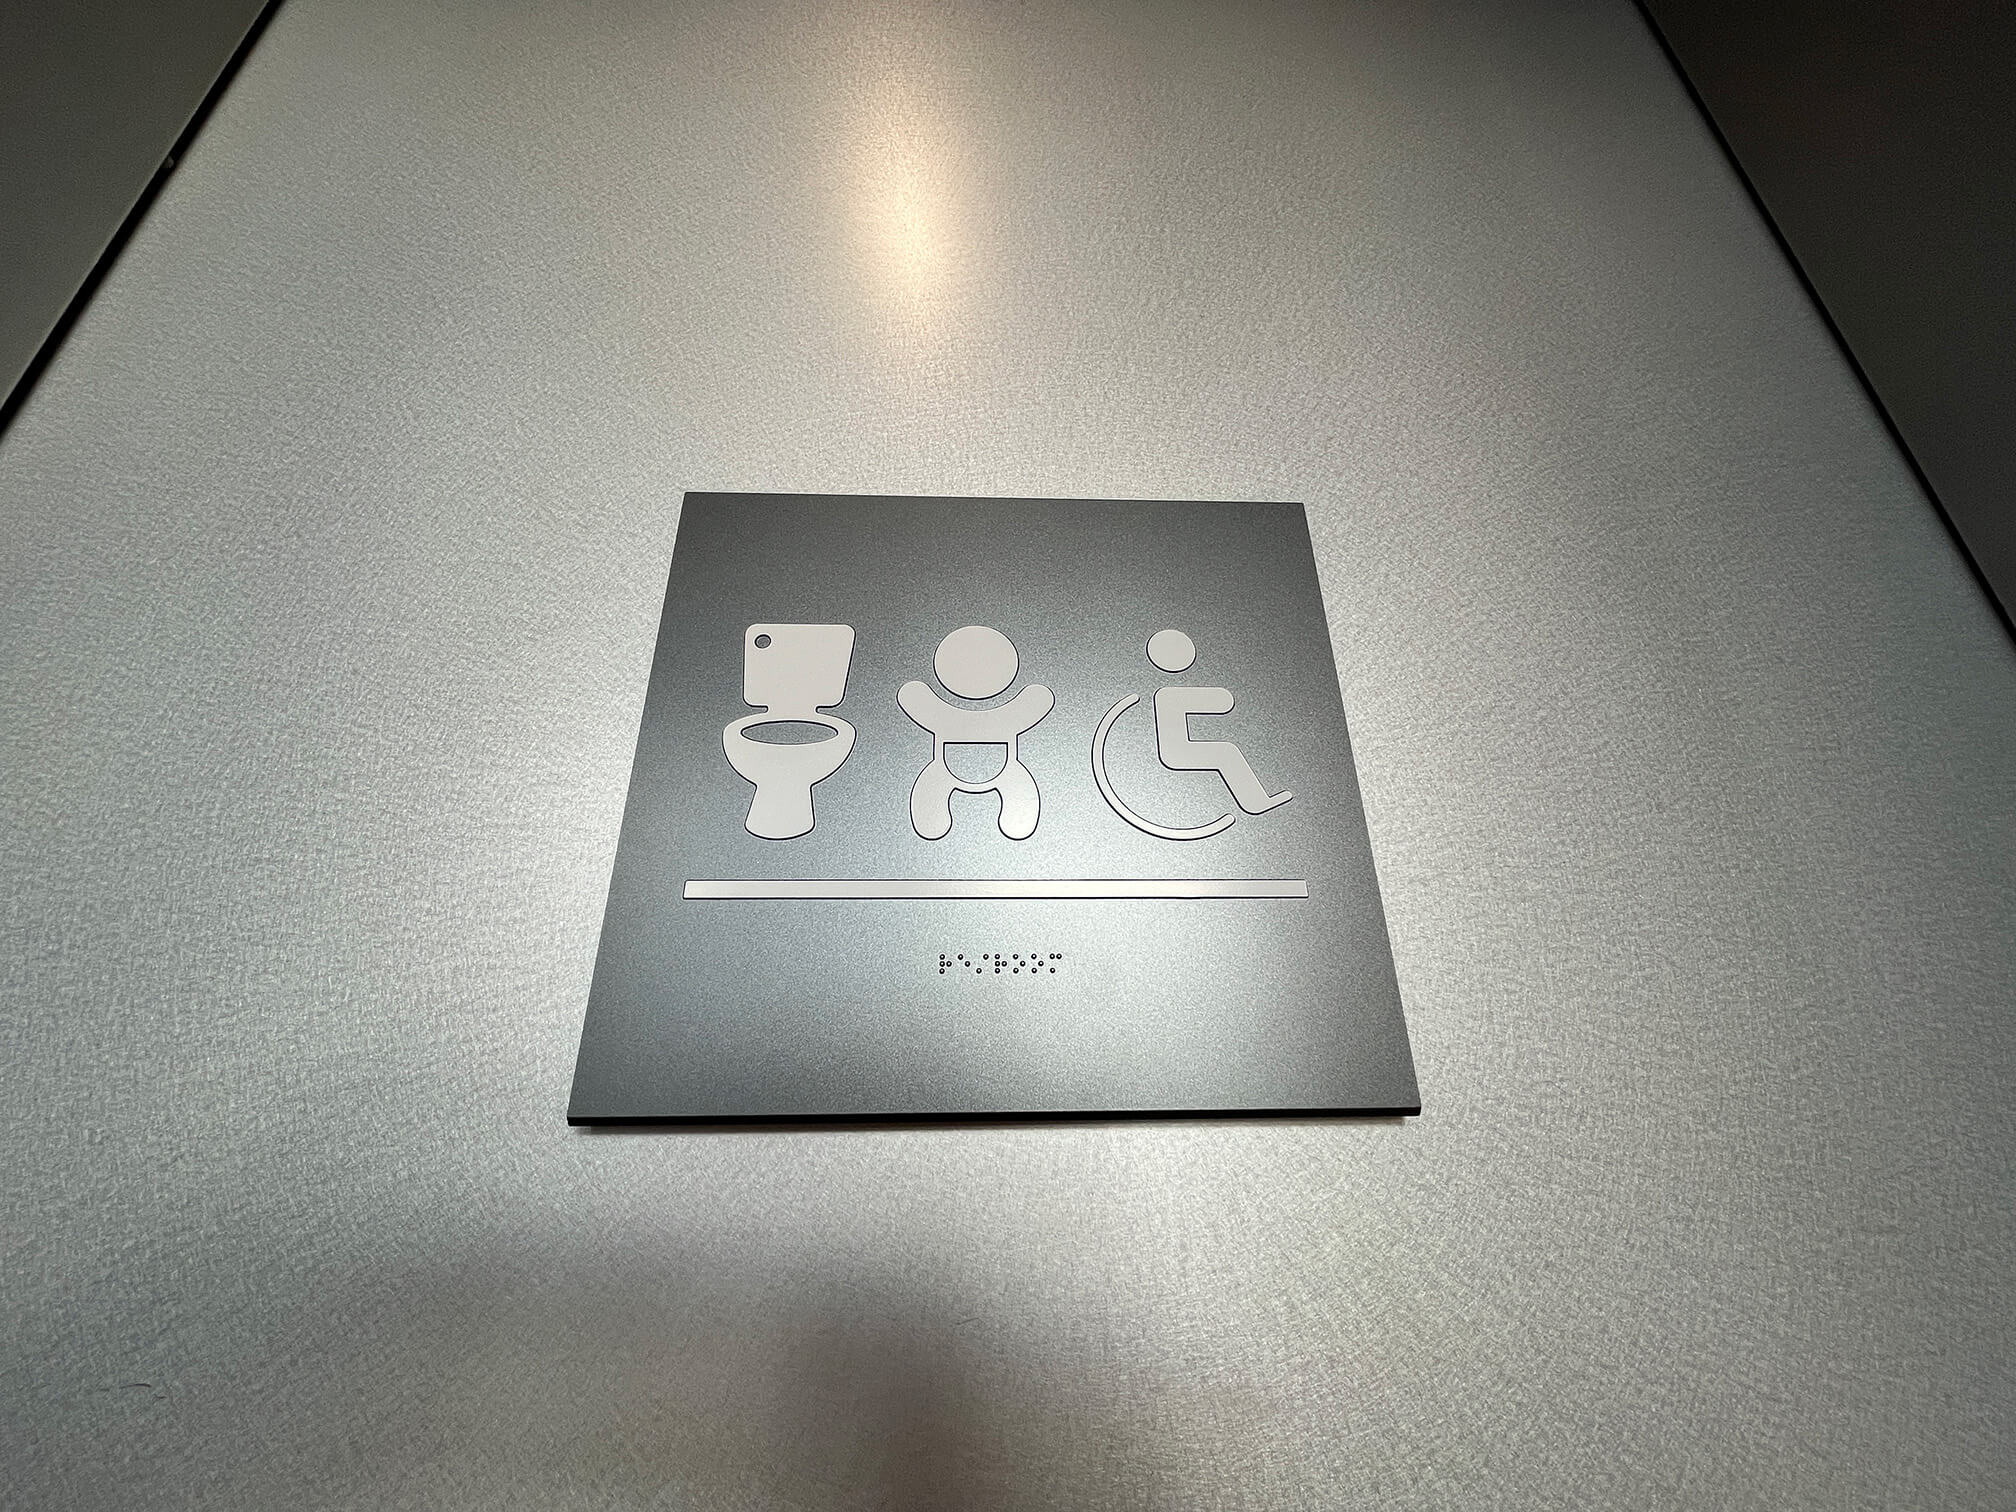 Typical signage for universal restrooms, with tactile symbols and braille facing the front, towards the approaching user.